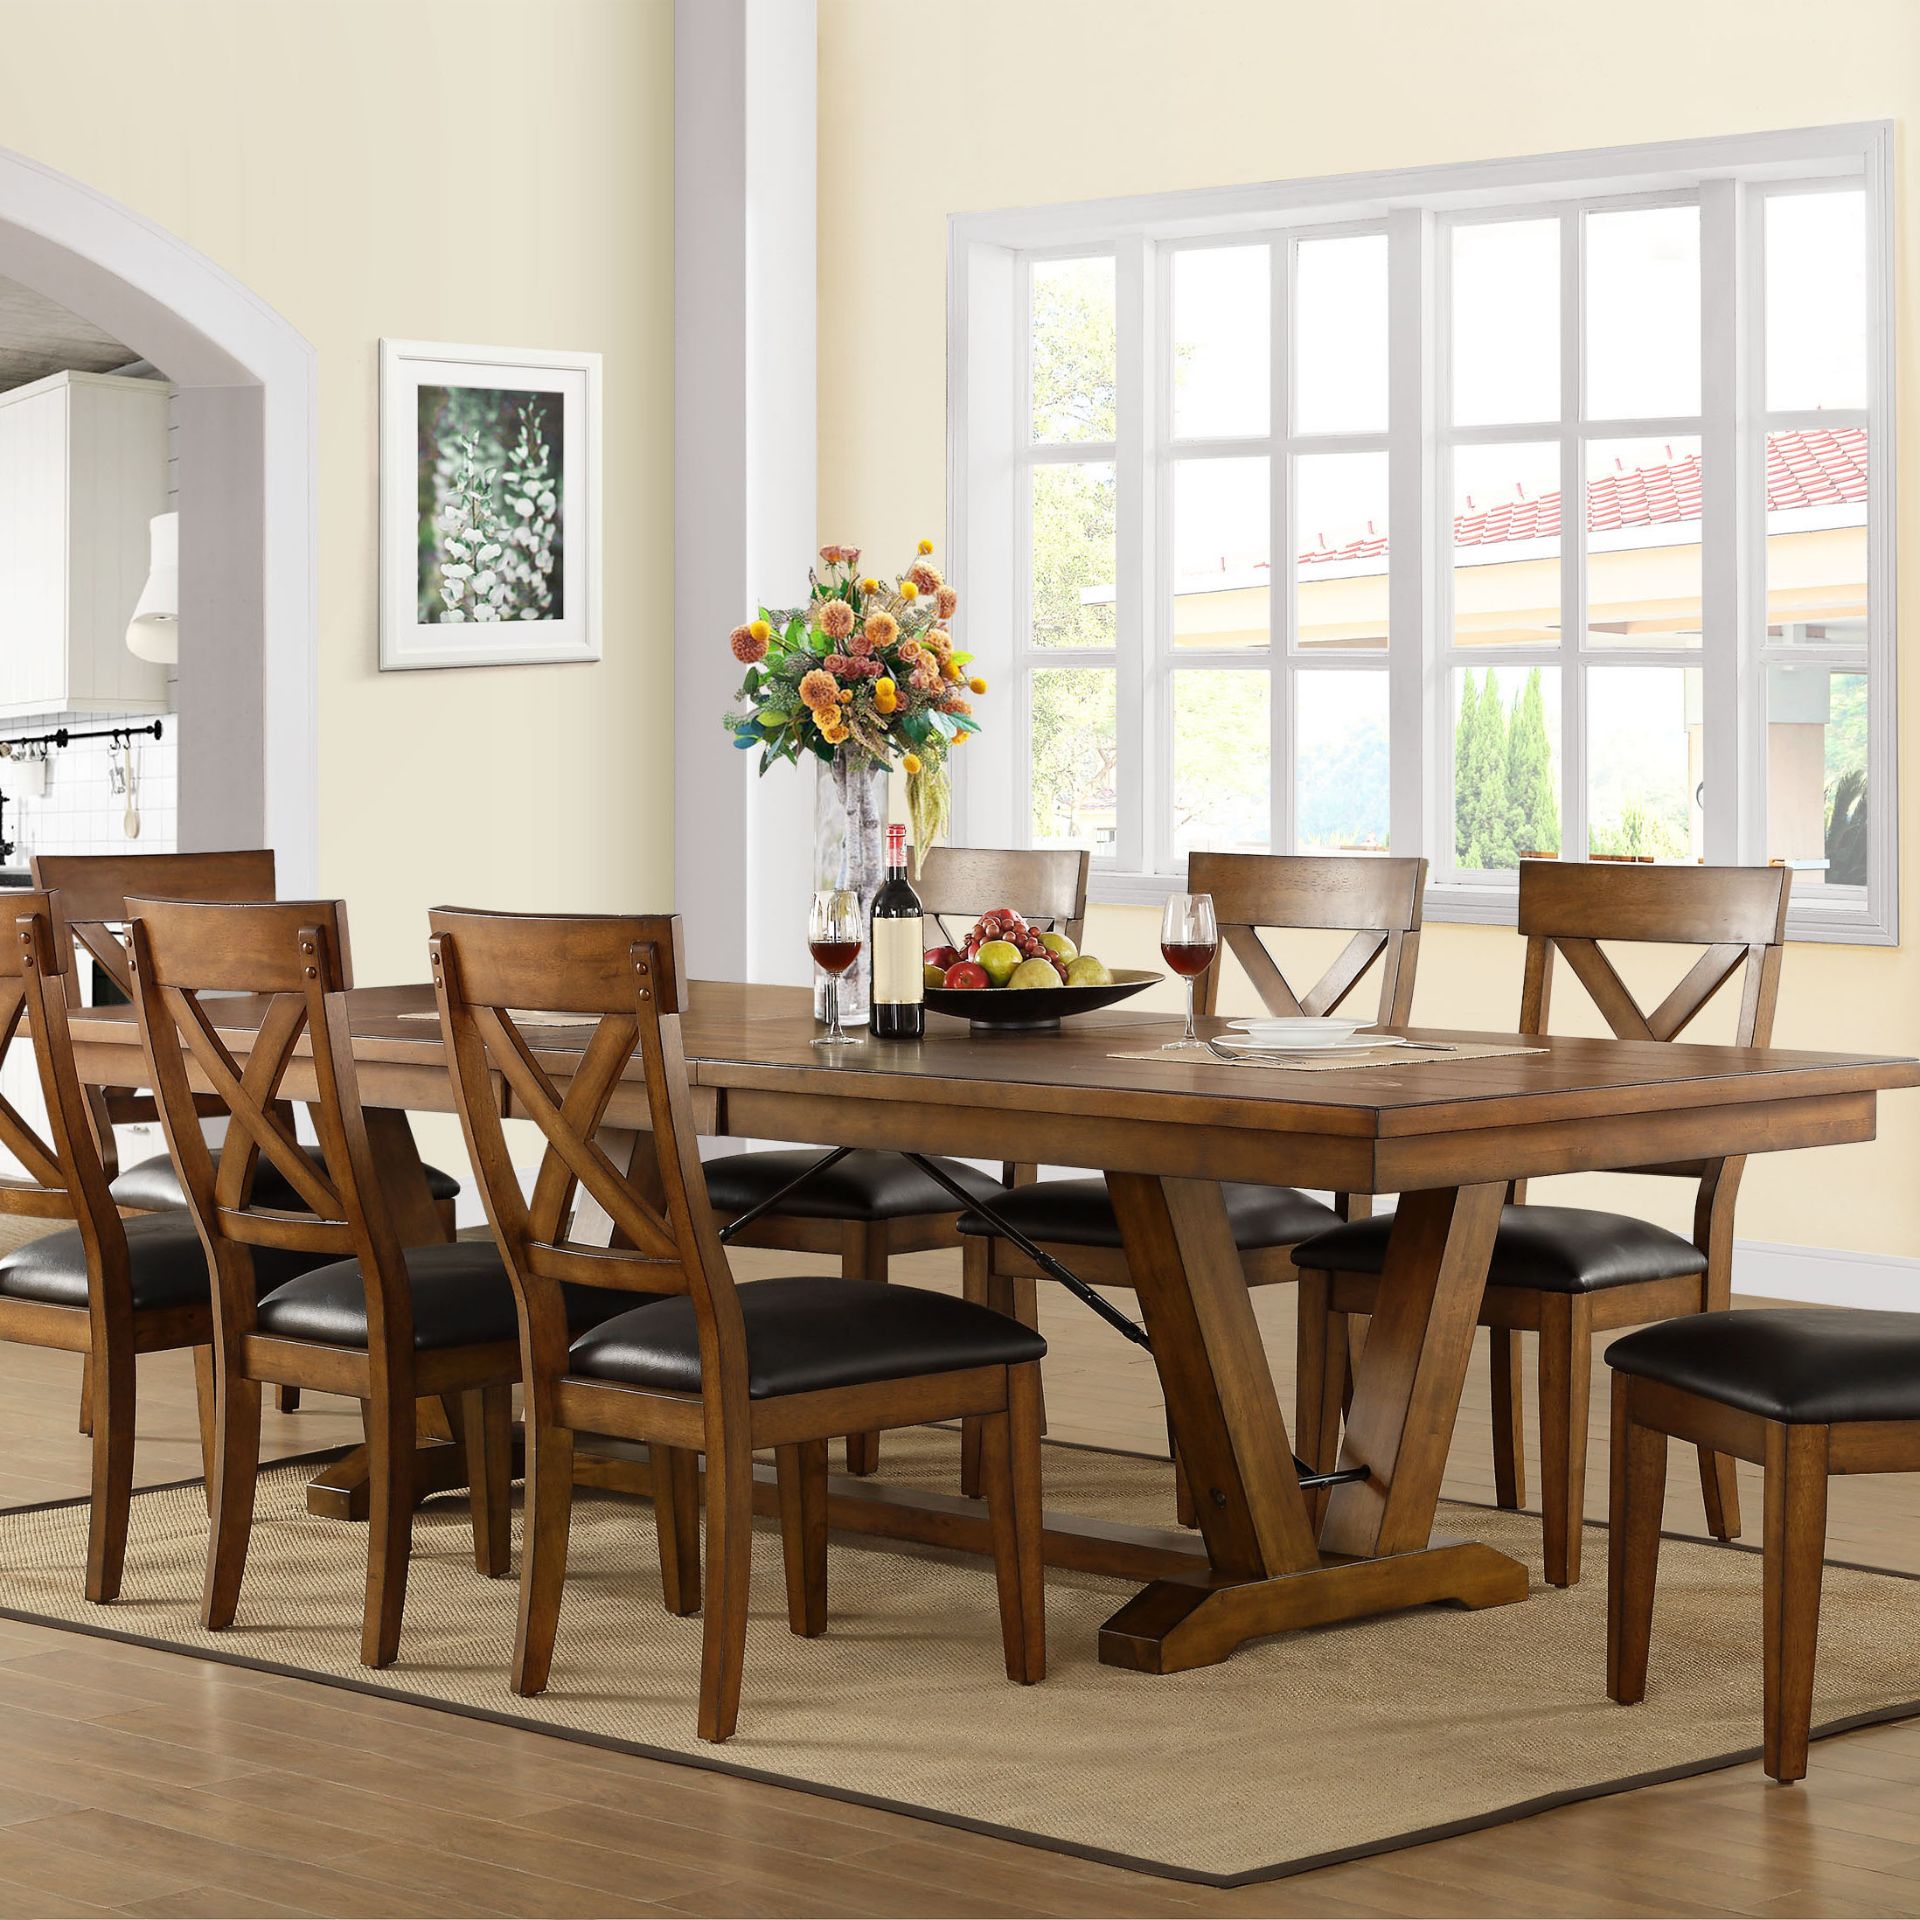 1 BAYSIDE FURNISHINGS 9 PIECE EXTENDABLE DINING SET INCLUDES 1 TABLE AND 8 CHAIRS RRP Â£999 (GENERIC